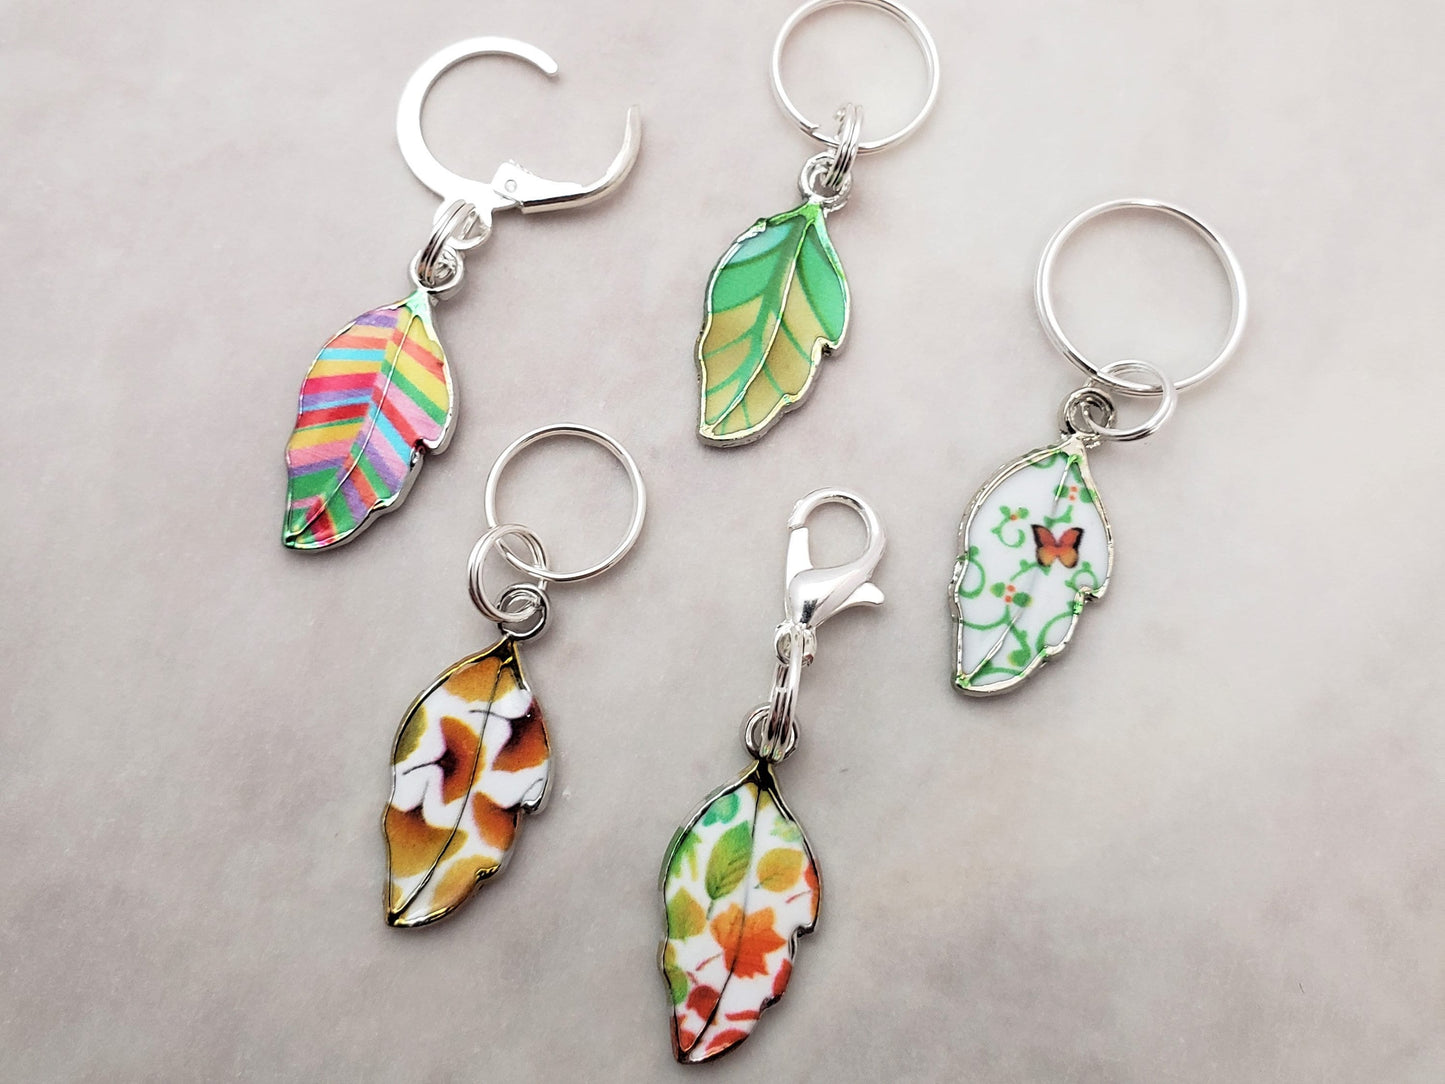 Leaf Stitch Markers for Knitting, 5pc mixed set | Crochet stitch marker, progress keeper, project bag charms, crochet accessories